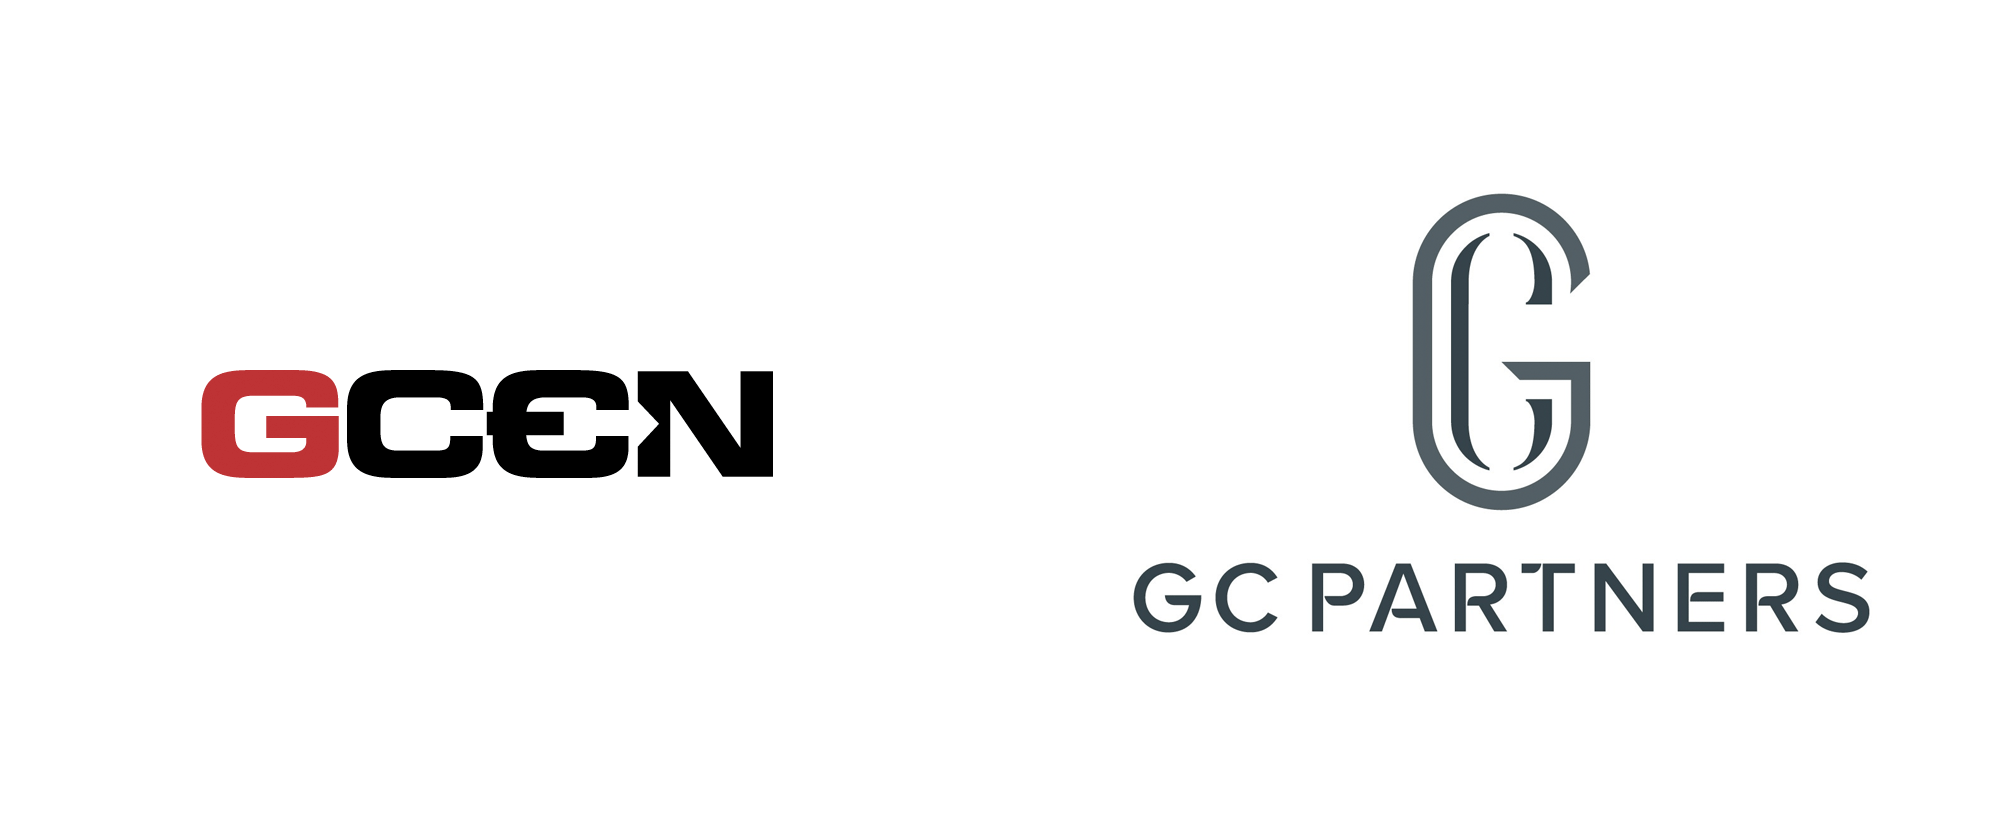 GC Logo - Brand New: New Logo and Identity for GC Partners by Brandpie